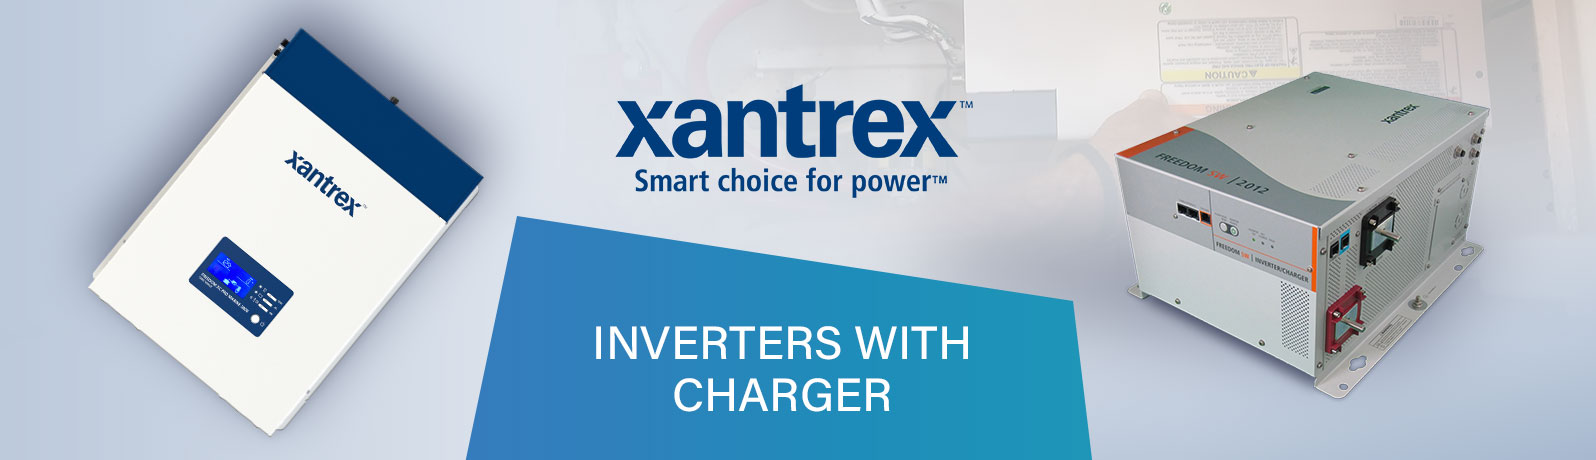 Xantrex Inverters with Charger